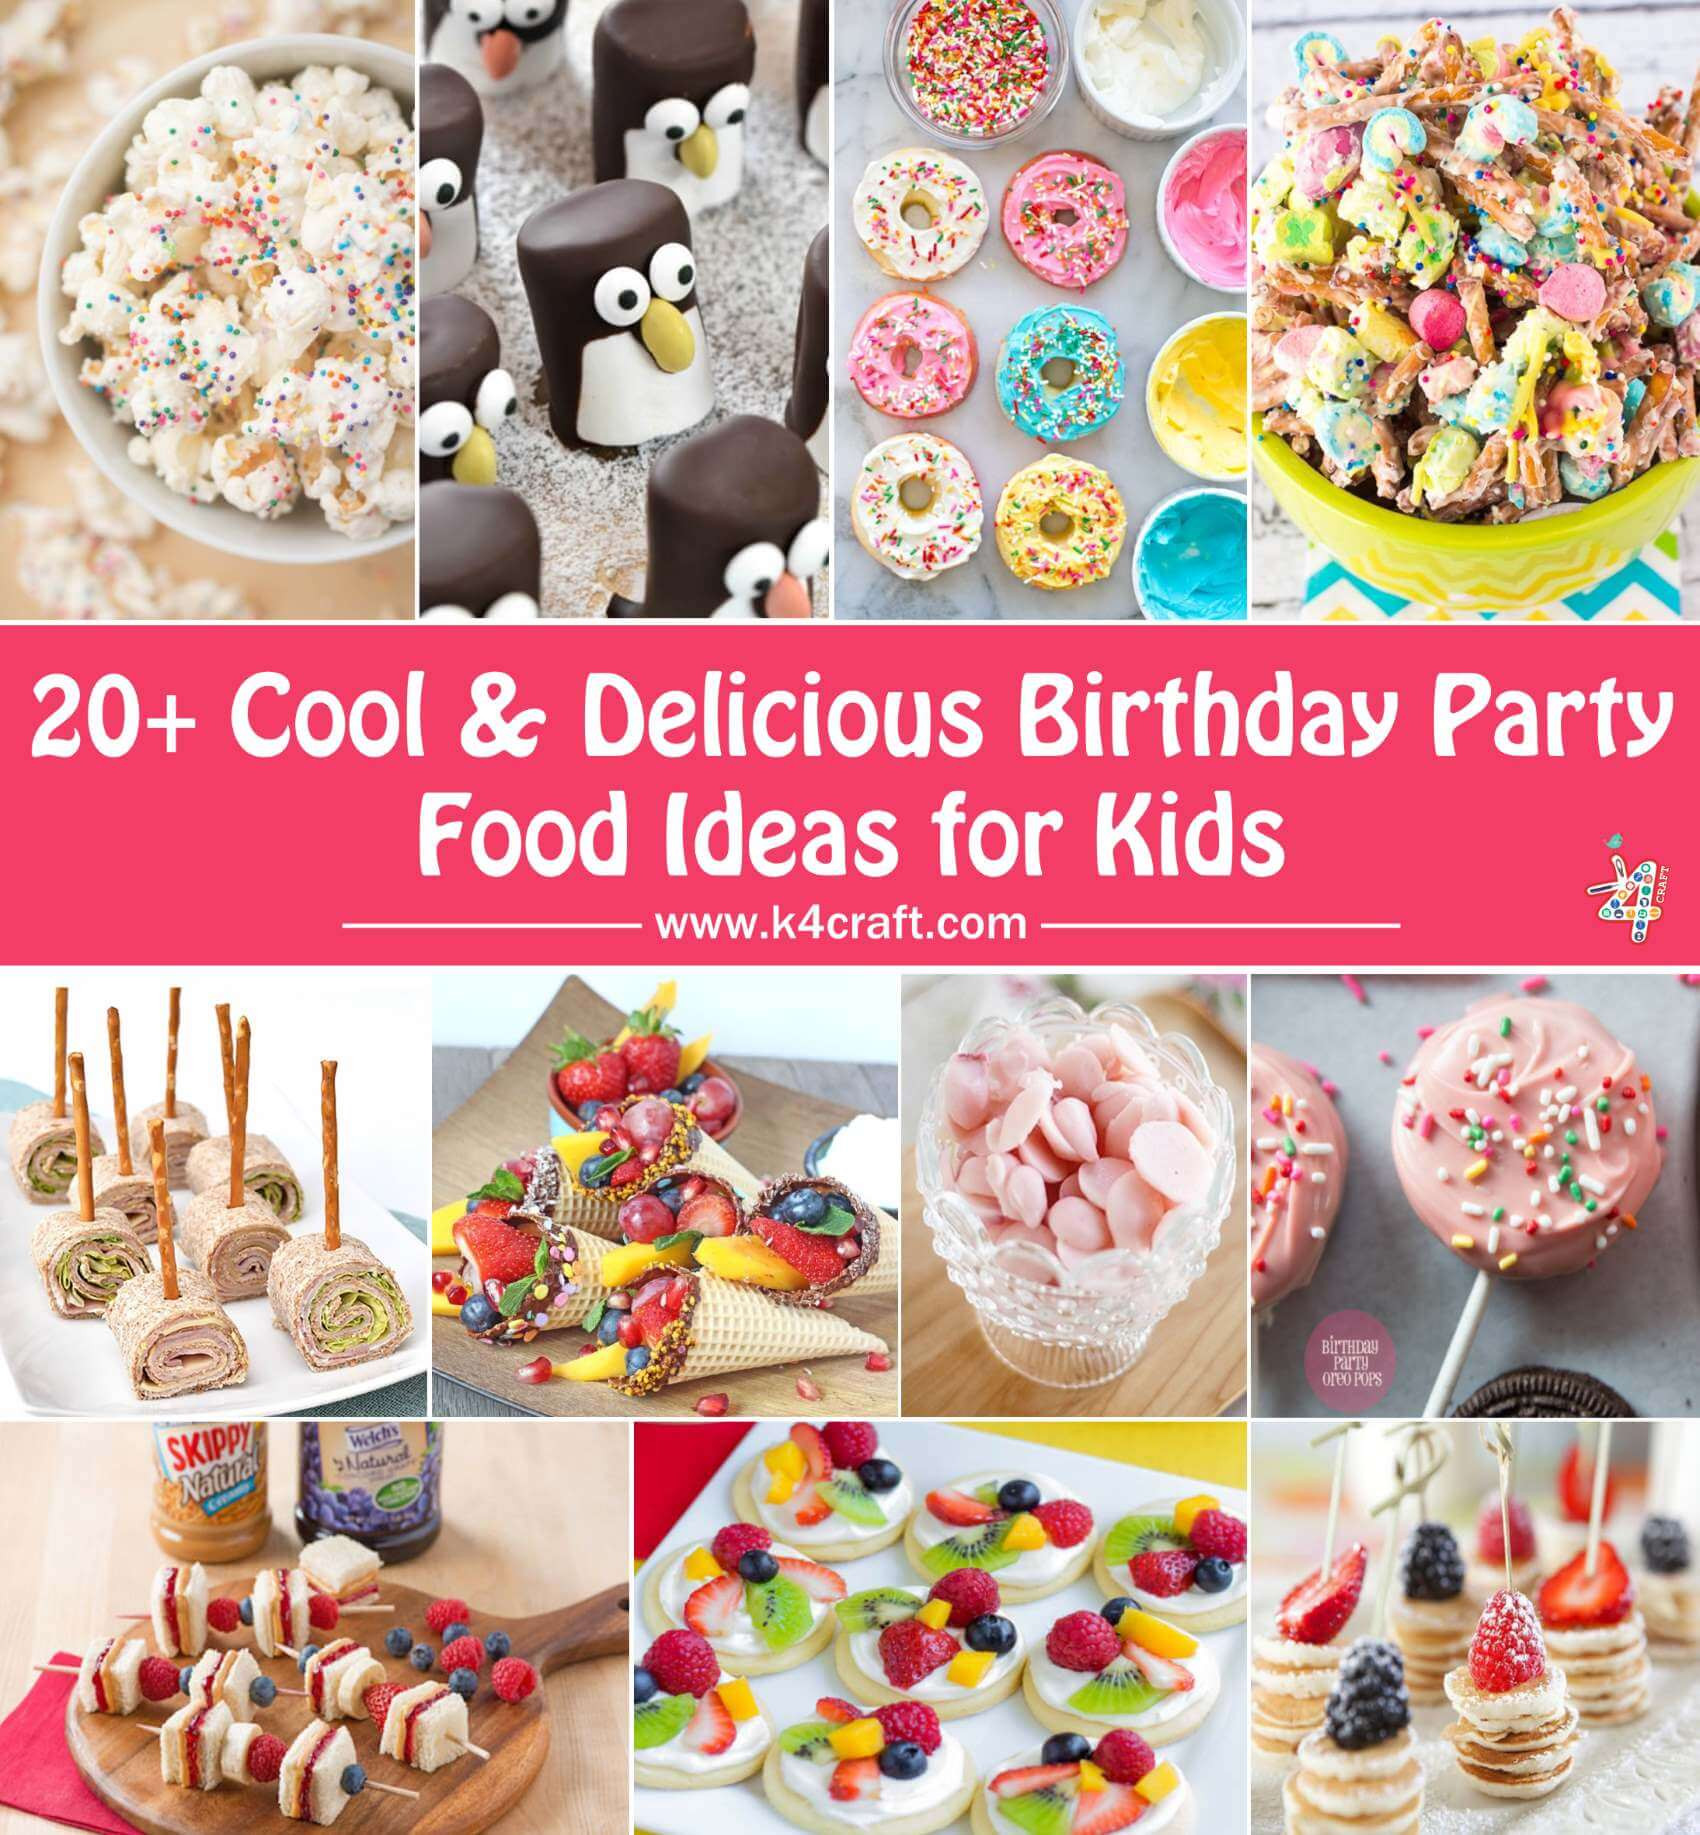 Toddler Bday Party Food Ideas
 Cool & Delicious Birthday Party Food Ideas for Kids • K4 Craft